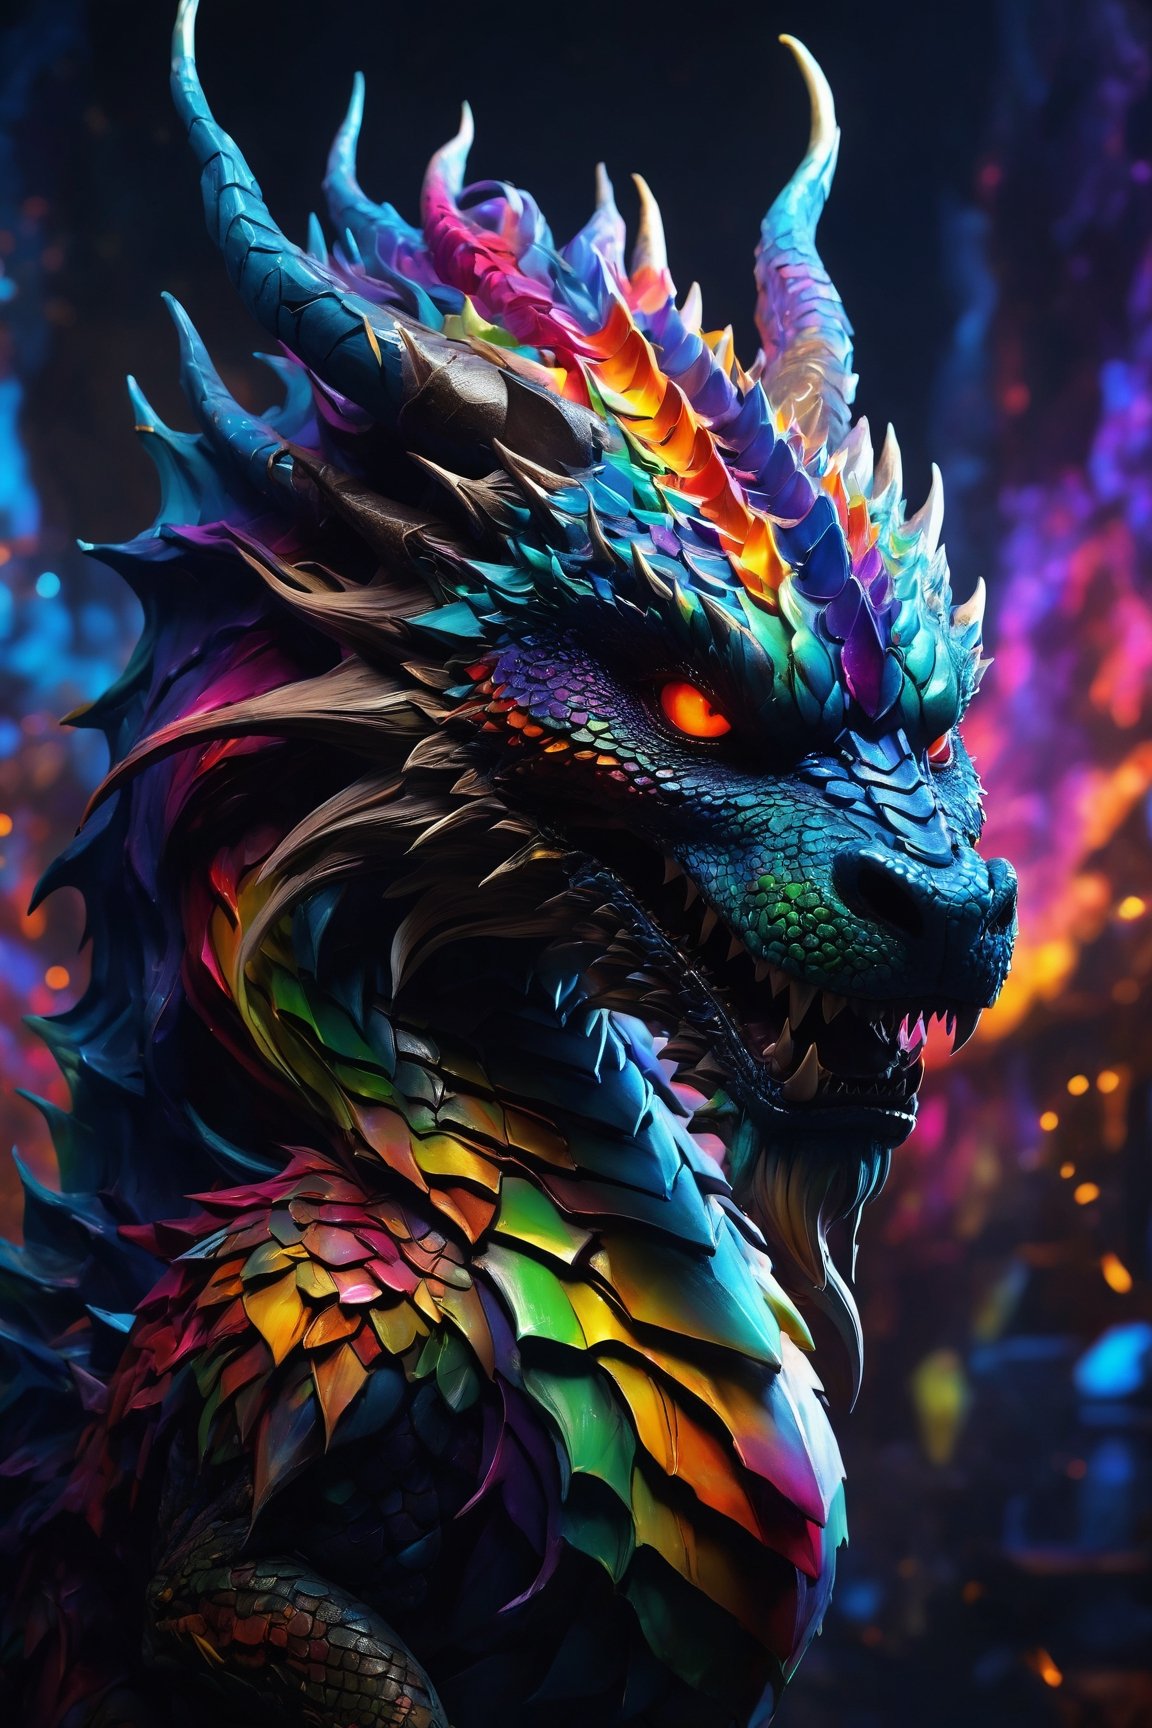 AiArtV, Dragon, (best quality, 8K, highres, masterpiece), ultra-detailed, (photorealistic, cinematic), illustration painting of a luminous and enchanting bad guy undead/human-like creature with vibrant and dynamic anime-style colors. The creature, with dark, colorful hair, strikes a dynamic pose in a brilliantly lit fantasy realm environment filled with a kaleidoscope of colors. The mid-shot composition and rule of thirds depth of field emphasize intricate details, creating a fantastical realm that bursts with subtle and vibrant colors. The use of light particles enhances the scene's grandeur and awe, making it a stunning visual masterpiece in a double-exposure style. The strong outlines contribute to the scene's cinematic feel, creating a super colorful and visually captivating narrative